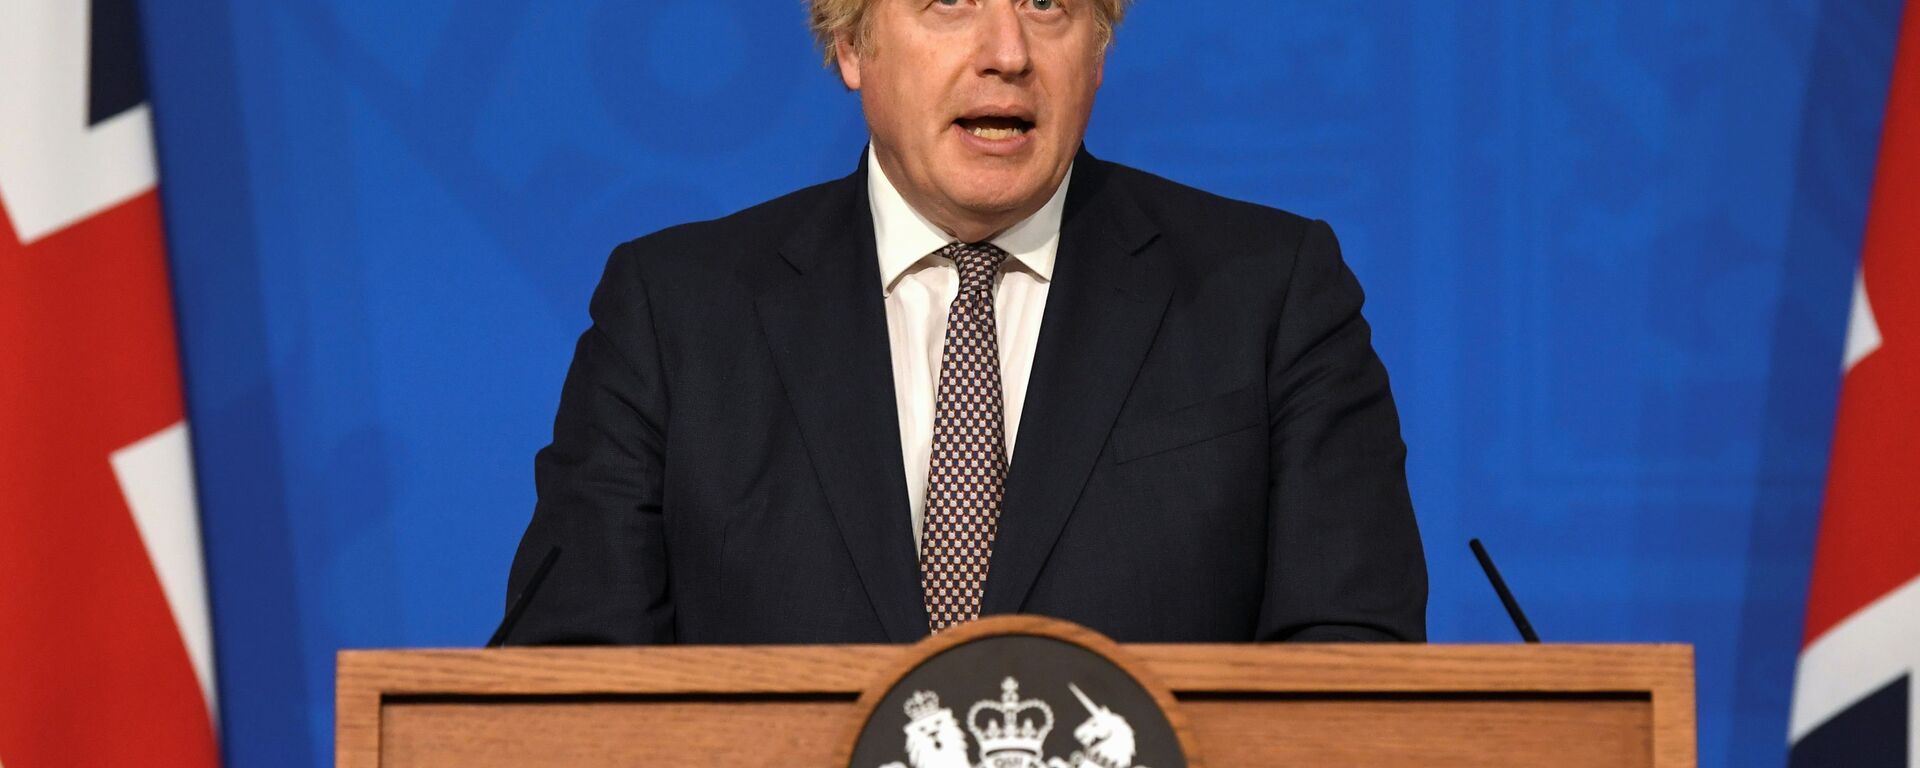 British Prime Minister Boris Johnson holds a news conference for England's COVID-19 lockdown easing announcement in London - Sputnik International, 1920, 05.07.2021